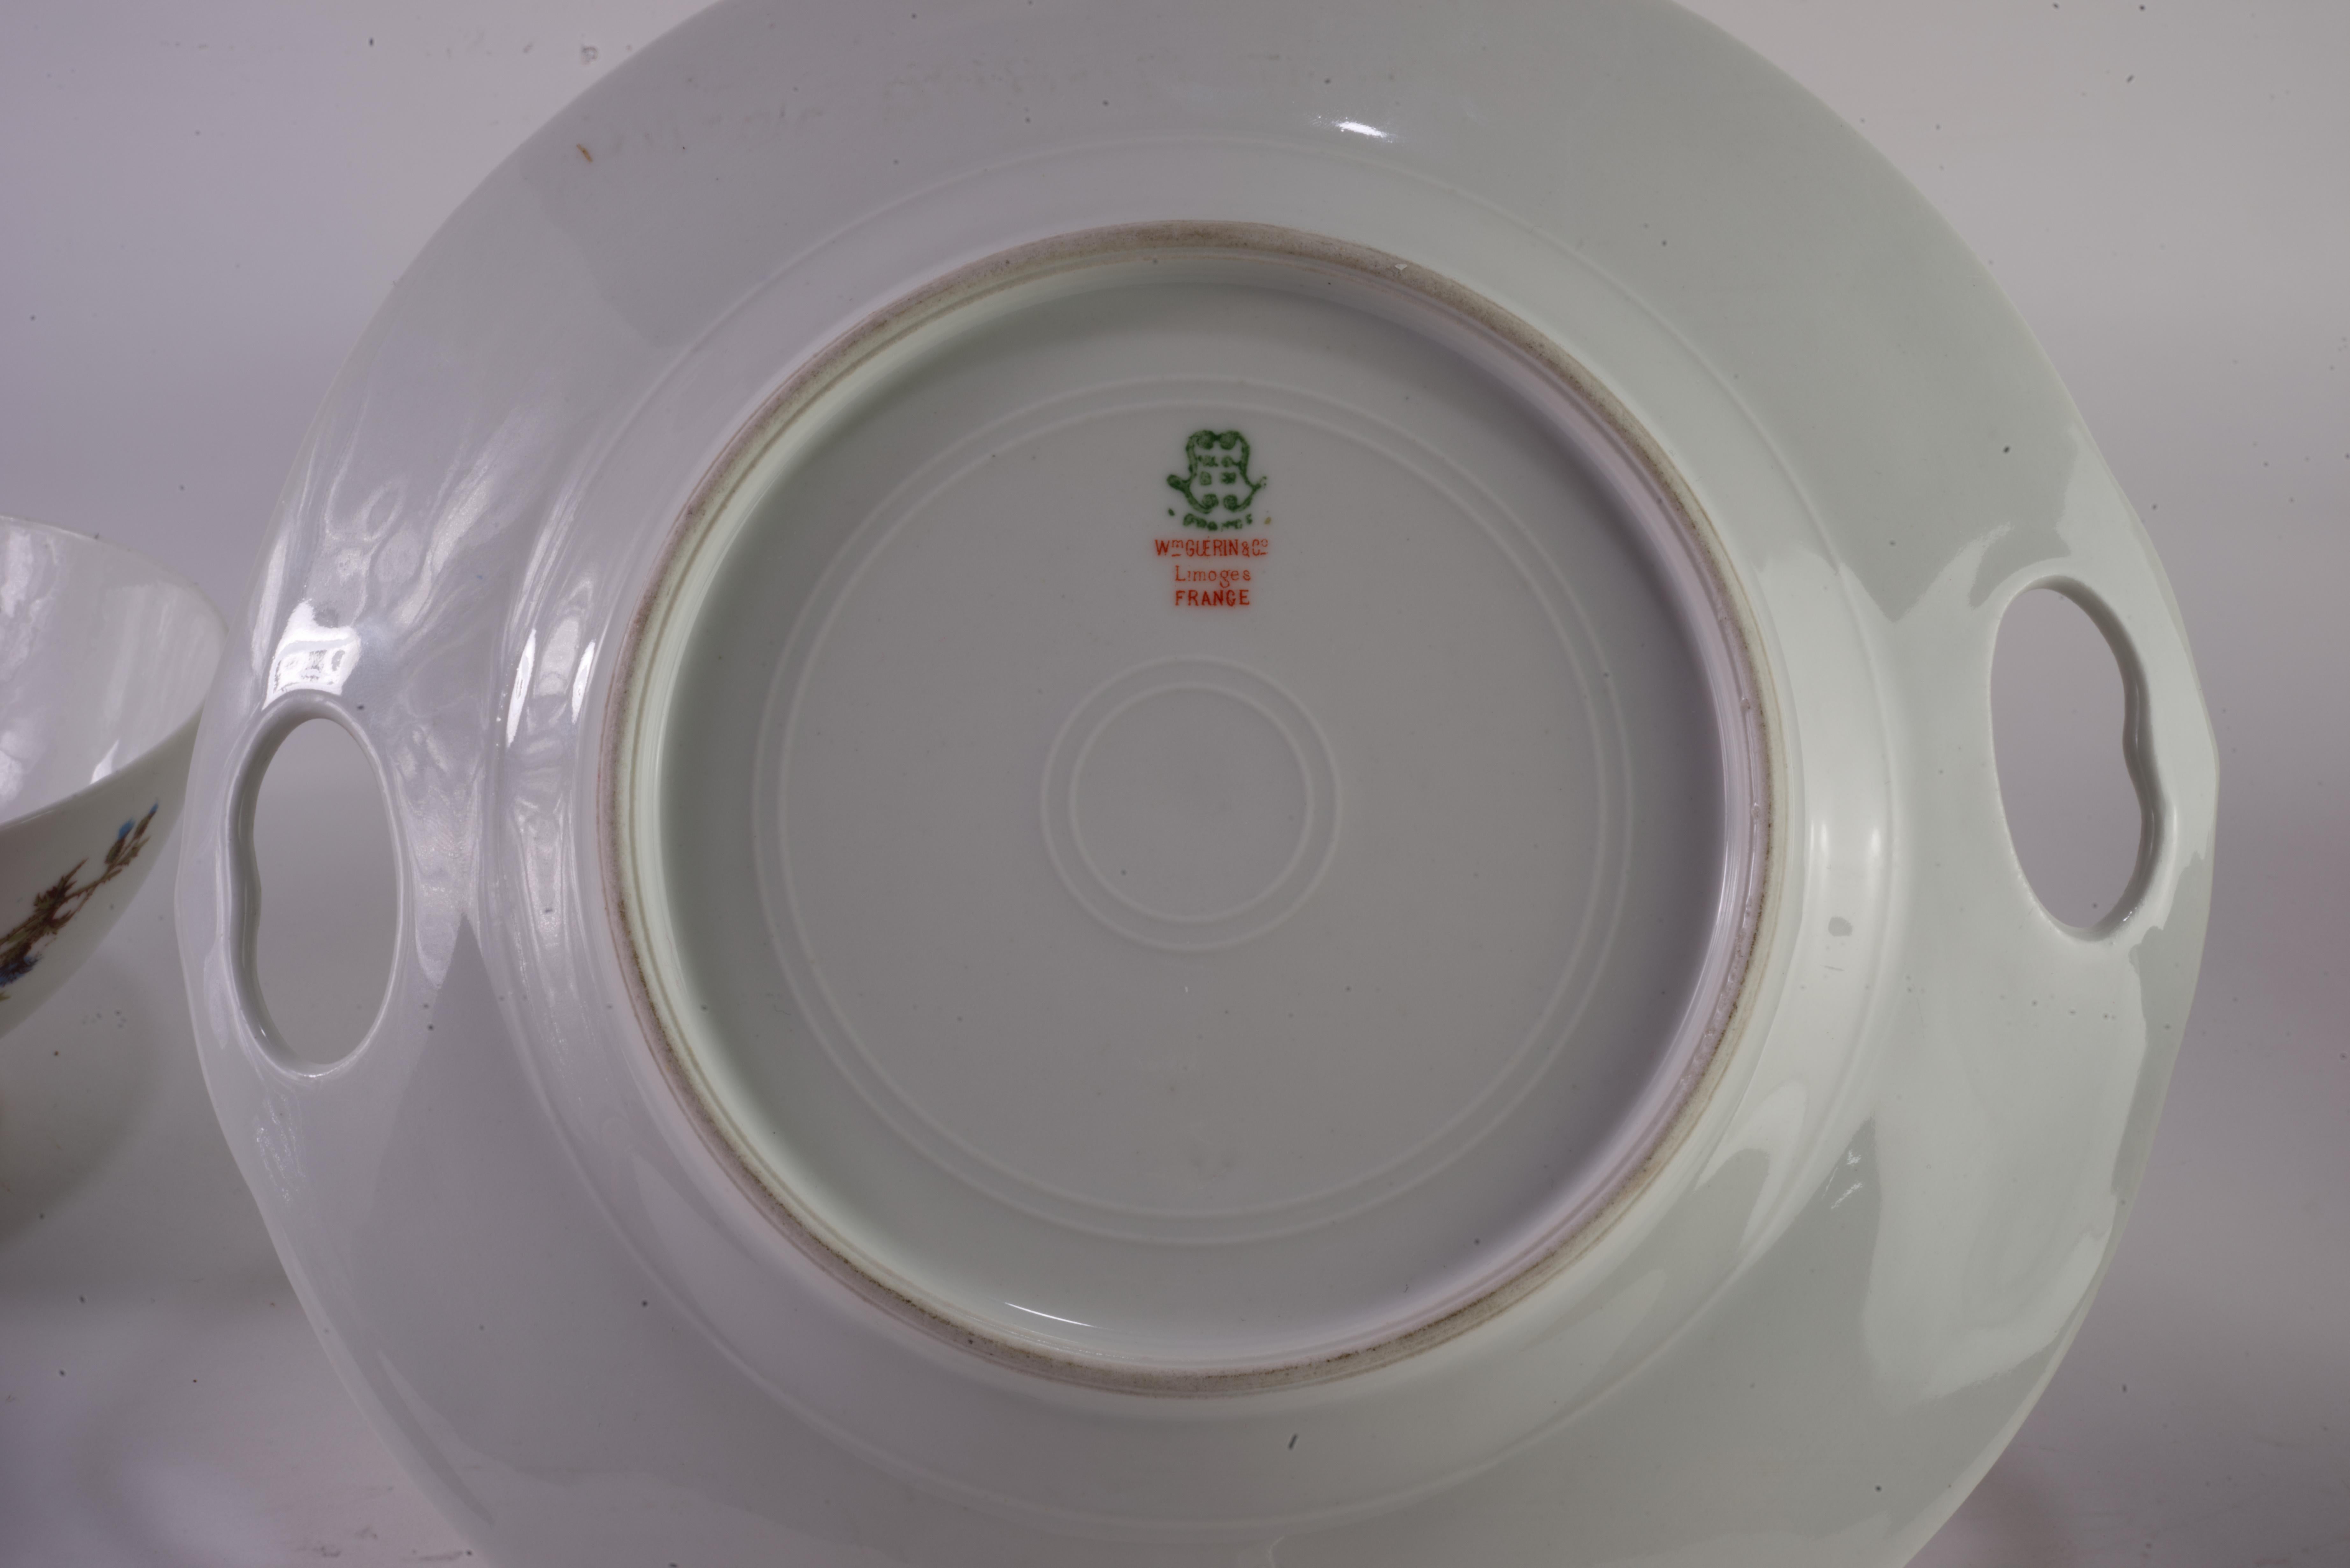 Guerin &Co Limoges France Dessert Service for 10, Bone China In Good Condition For Sale In Clifton Springs, NY